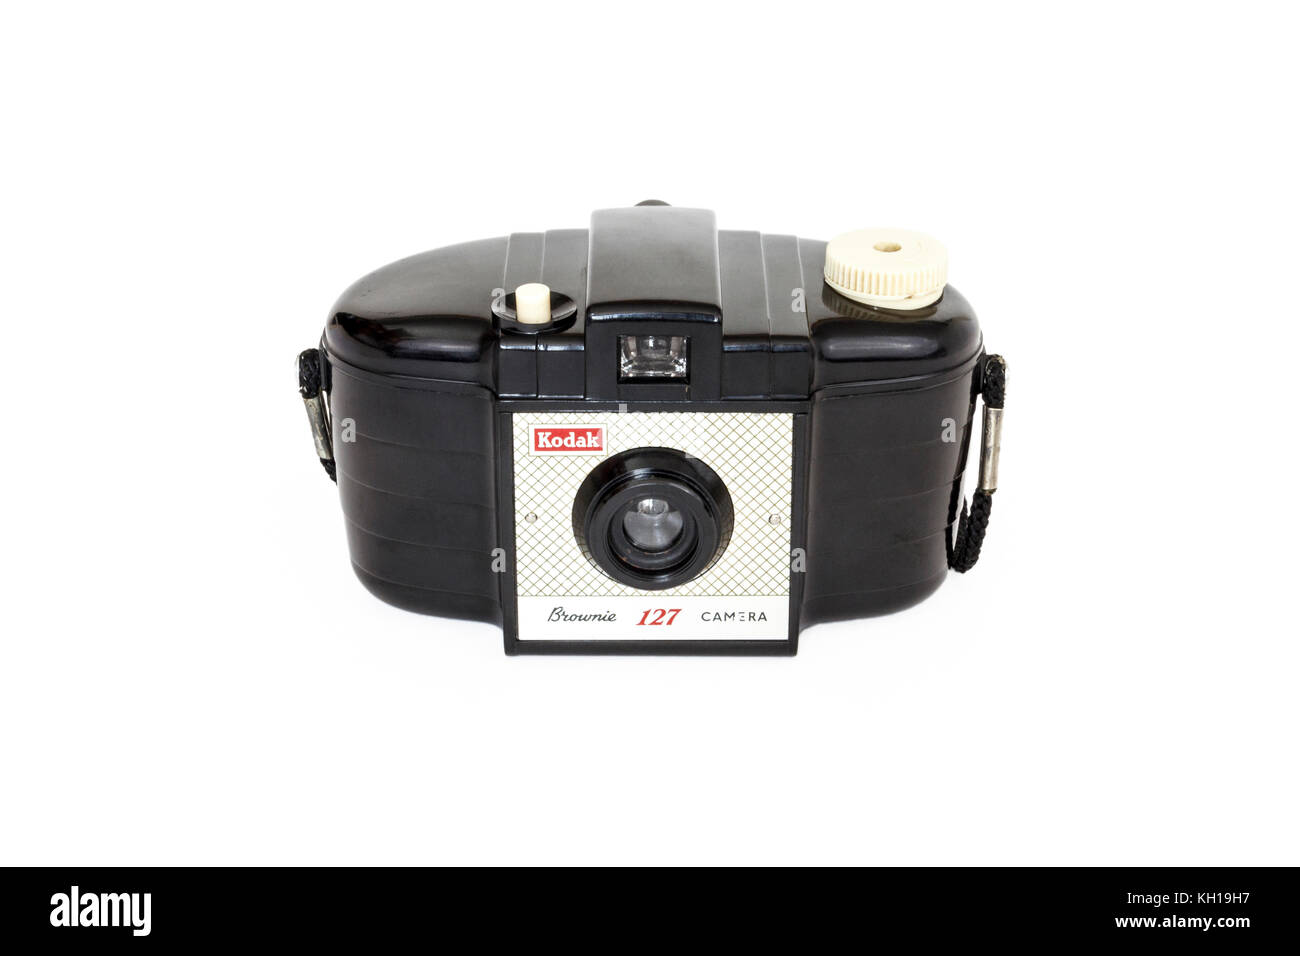 Classic 1950s Kodak Brownie 127 roll film camera, isolated against a white background Stock Photo